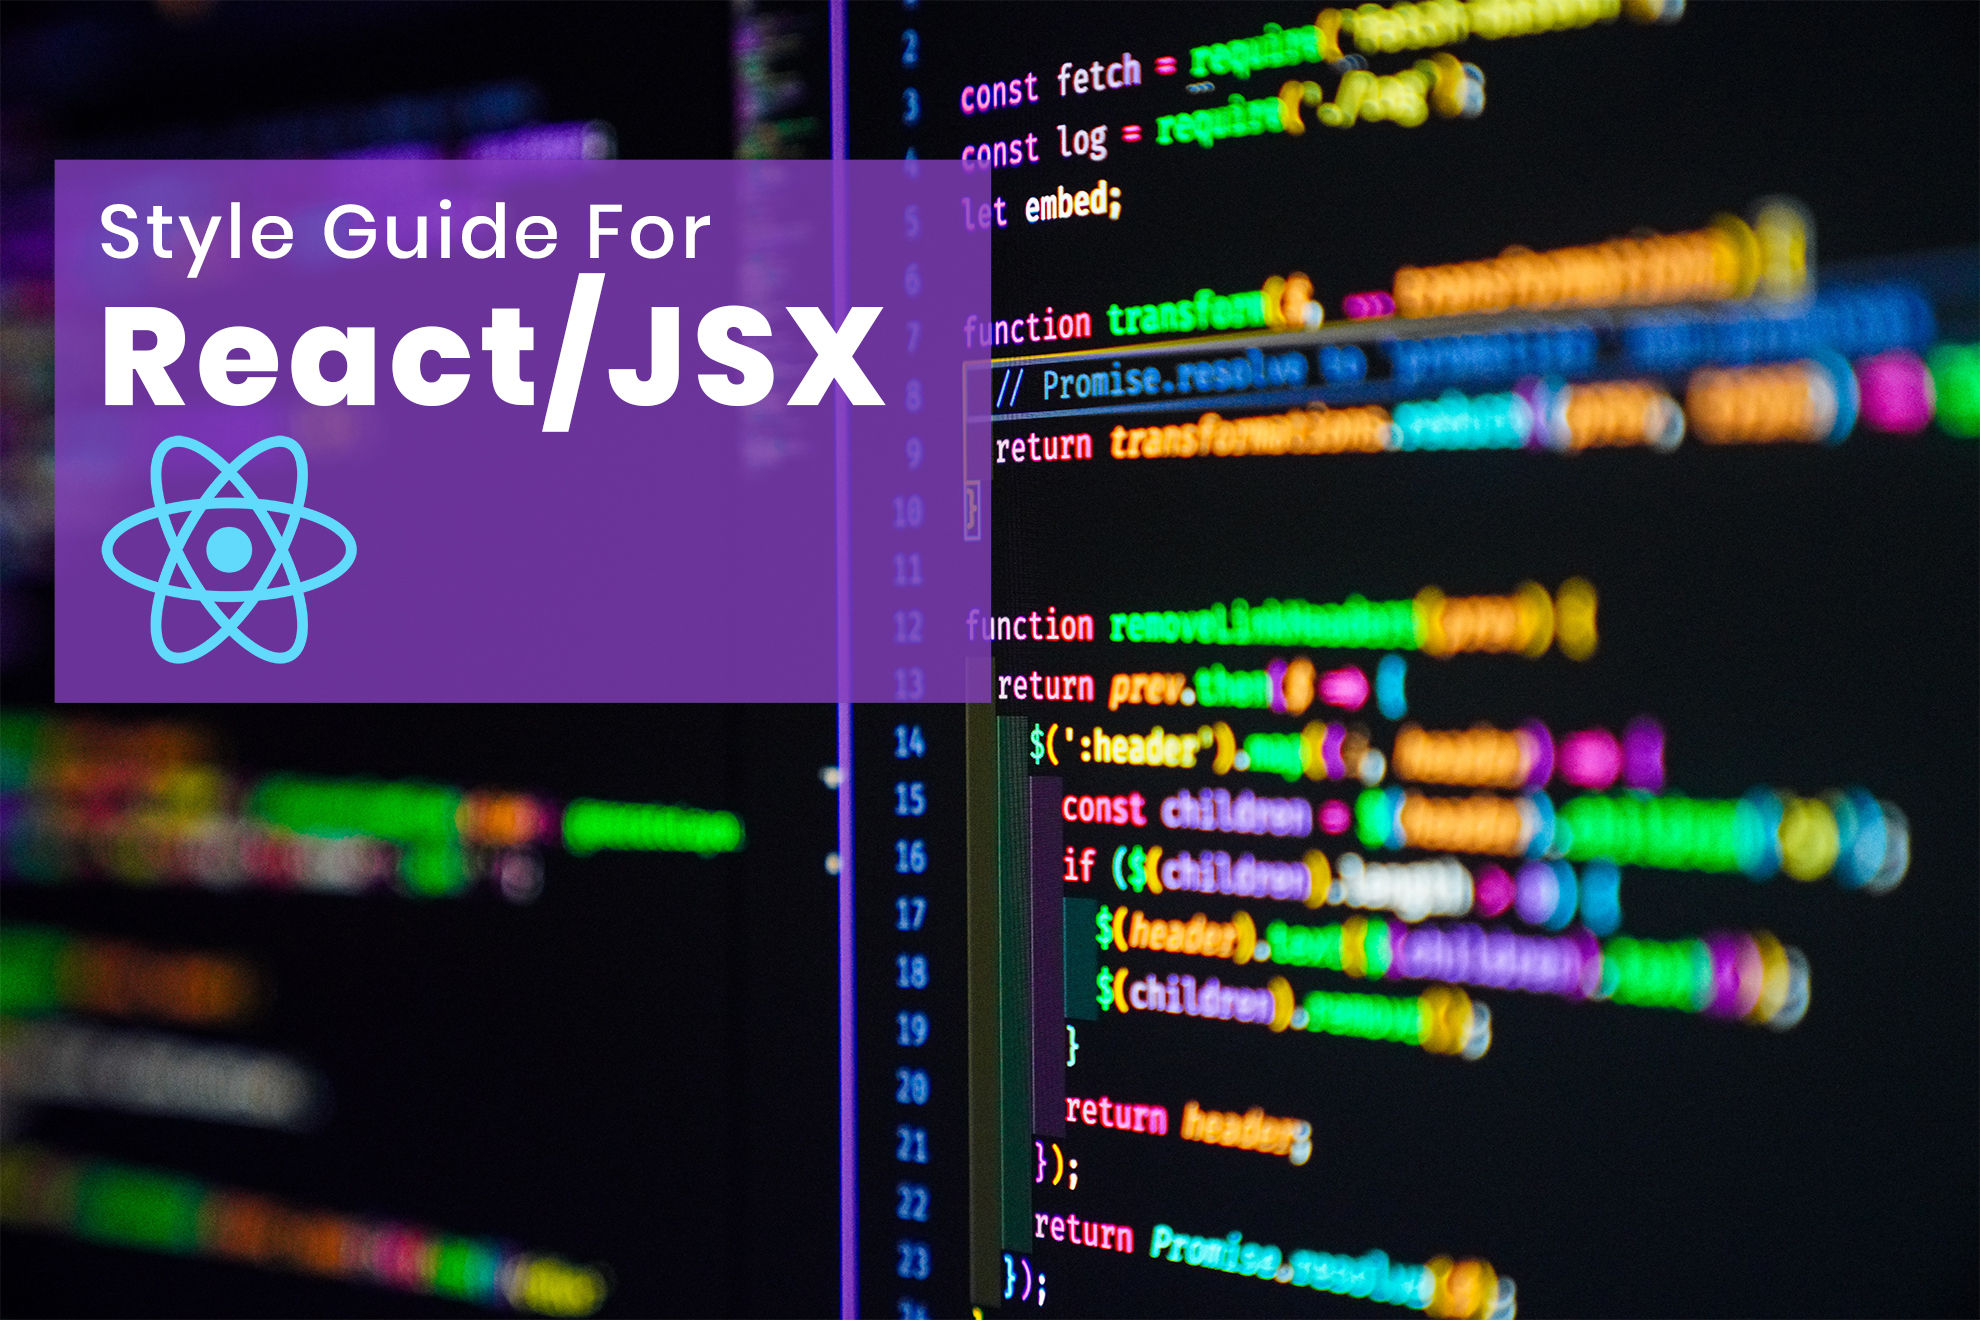 Style Guide for React/JSX